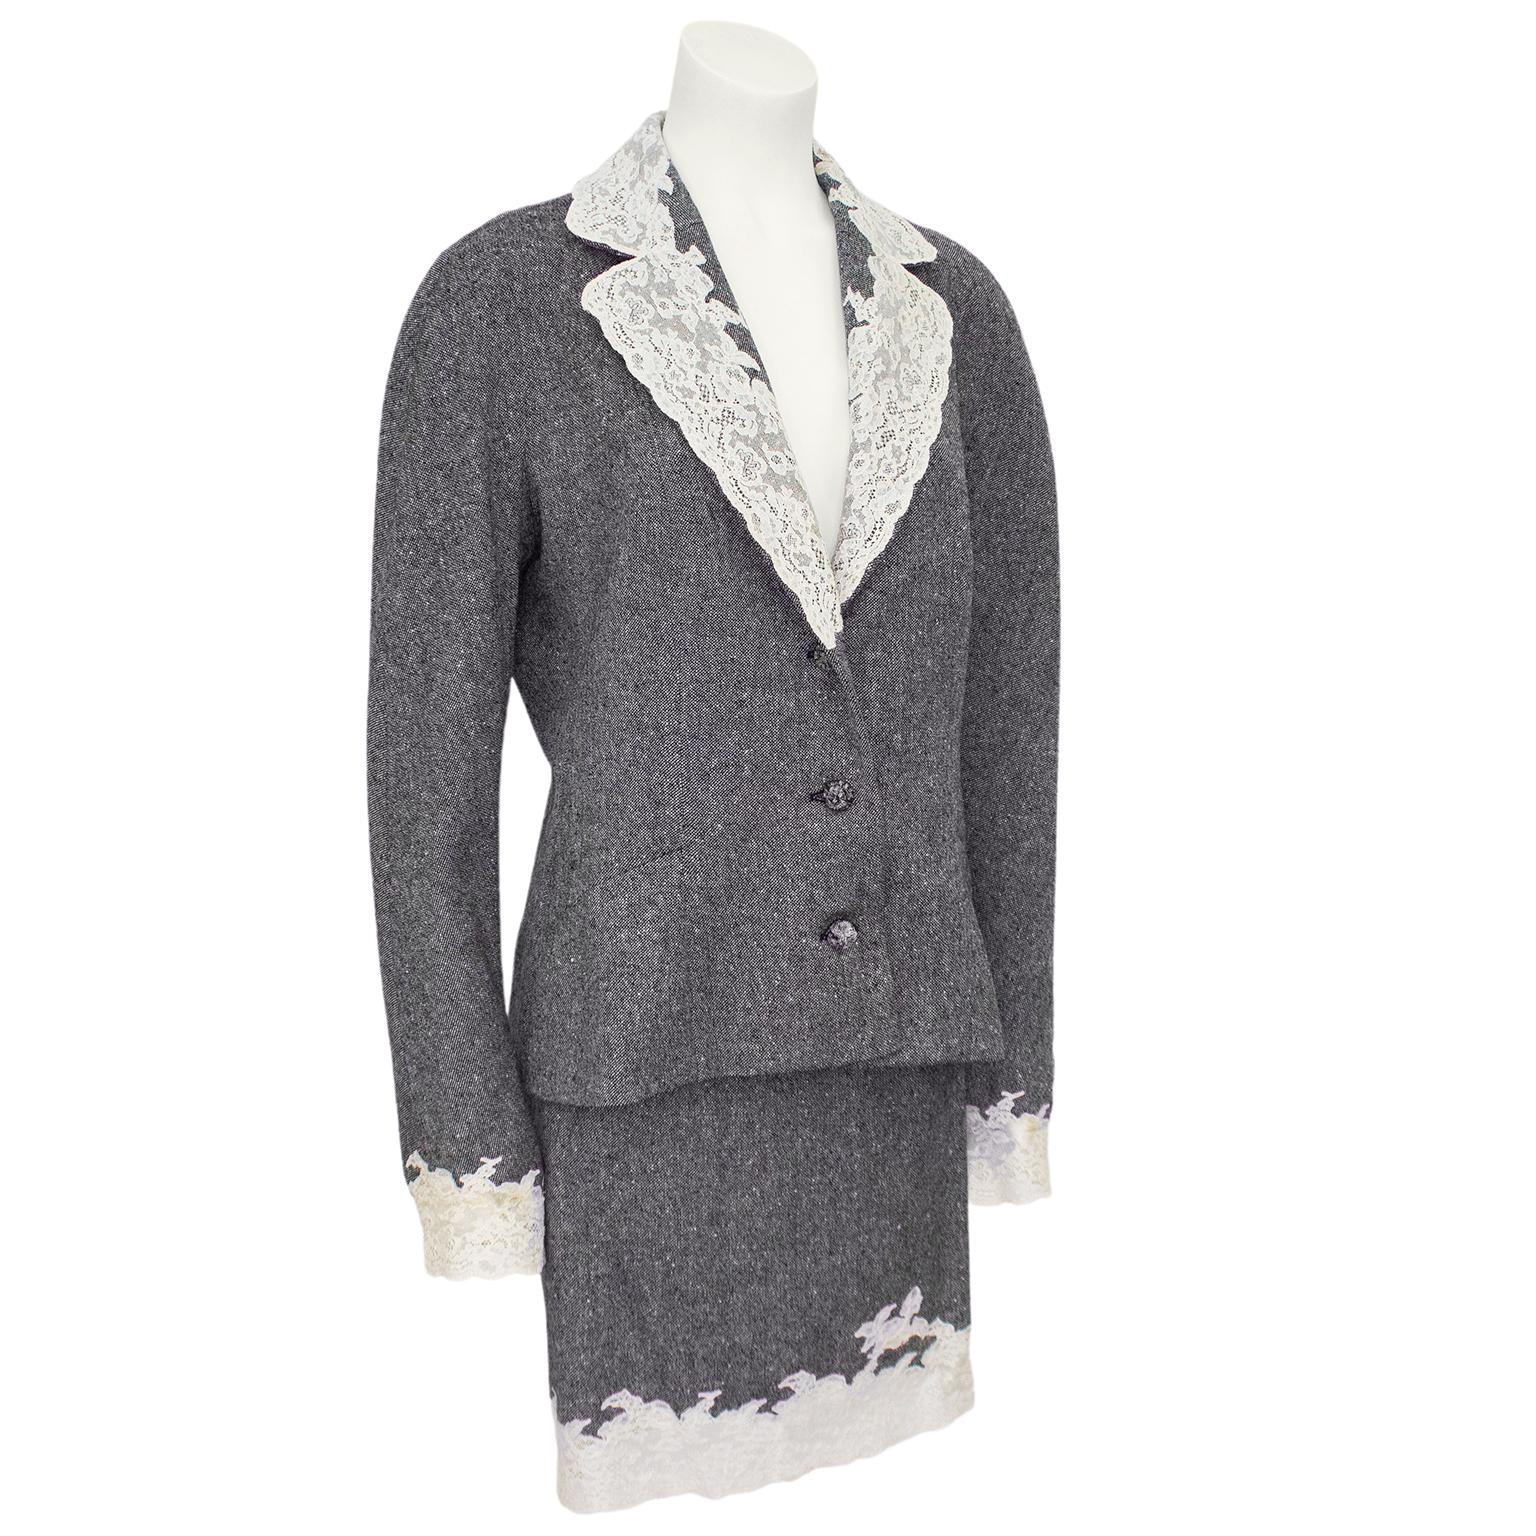 Christian Dior suit from the fall/winter 1998 collection. Grey wool tweed blazer embellished with with cream lace at the notched collar and cuffs. Oversized shoulders and three matching grey passimentarie buttons. Cream silk lining with large